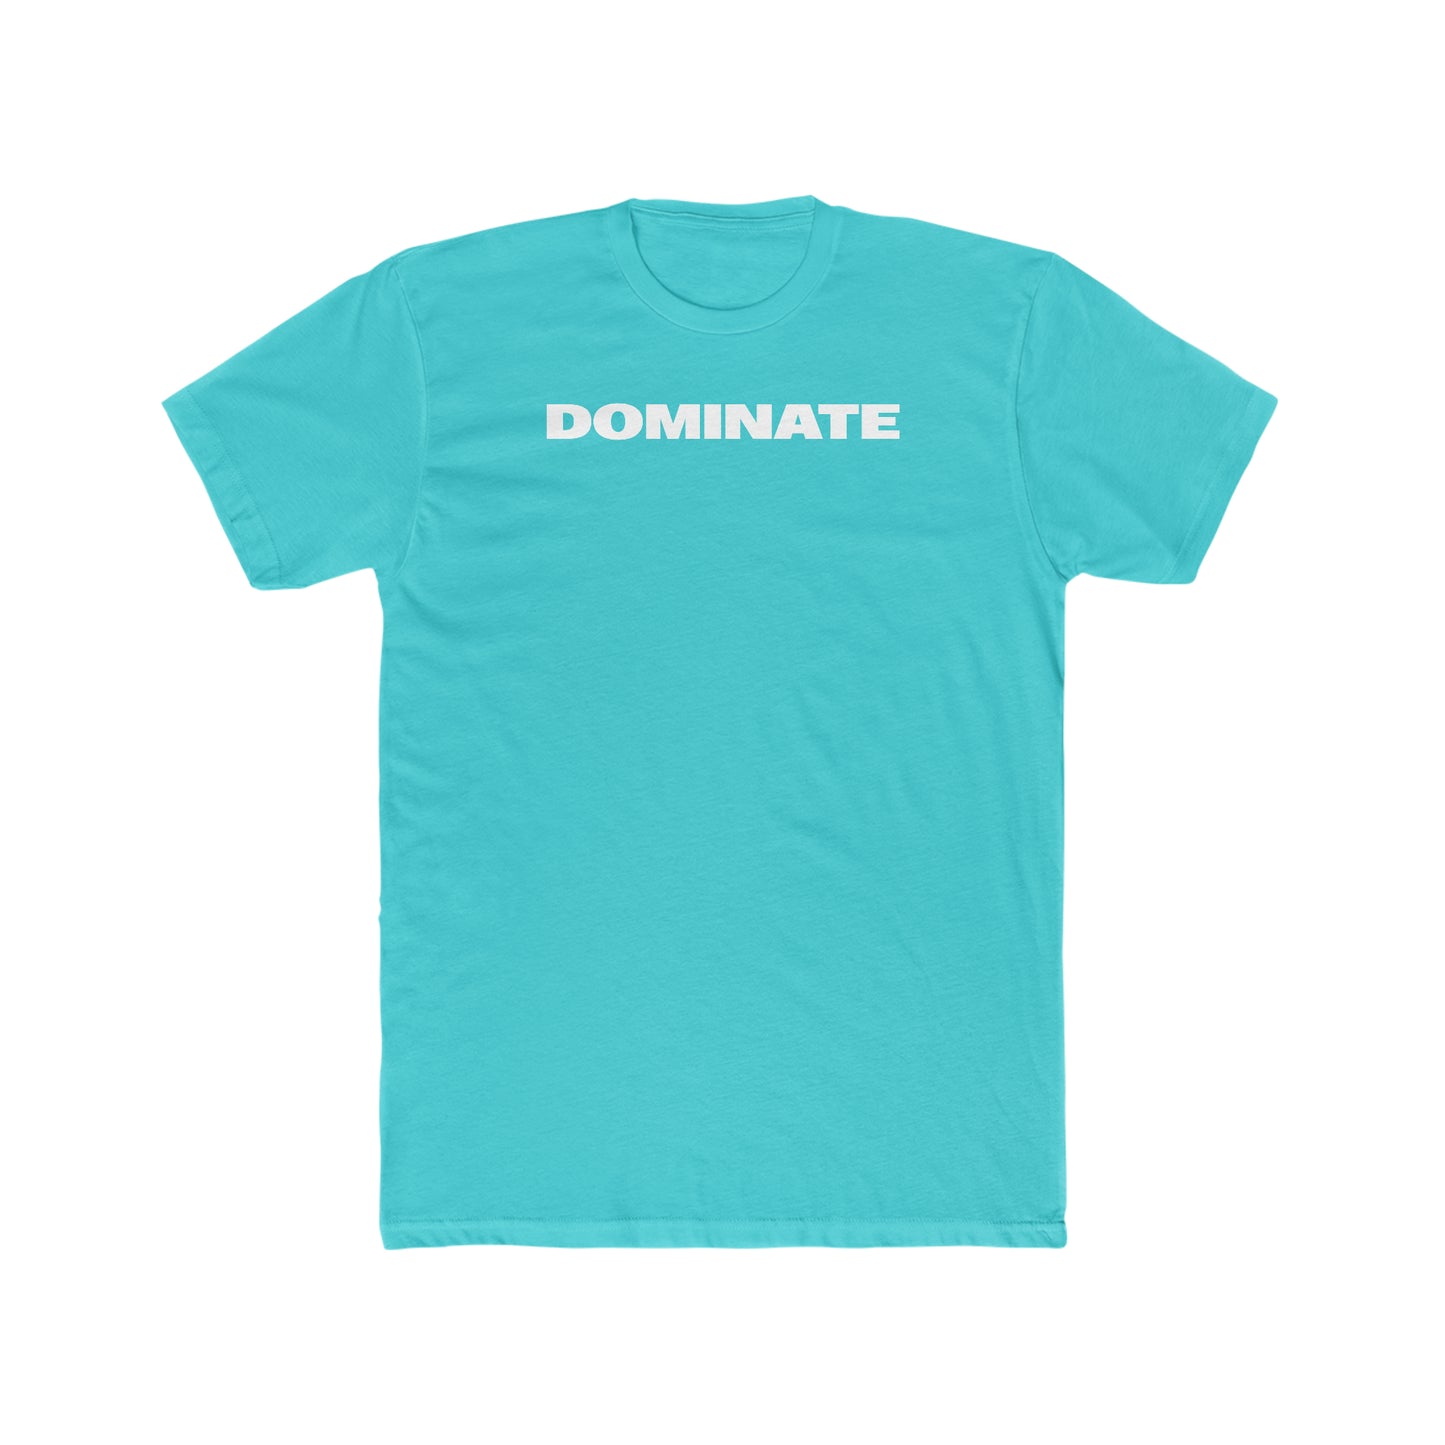 Dominate Tee - Never Stop Chasing